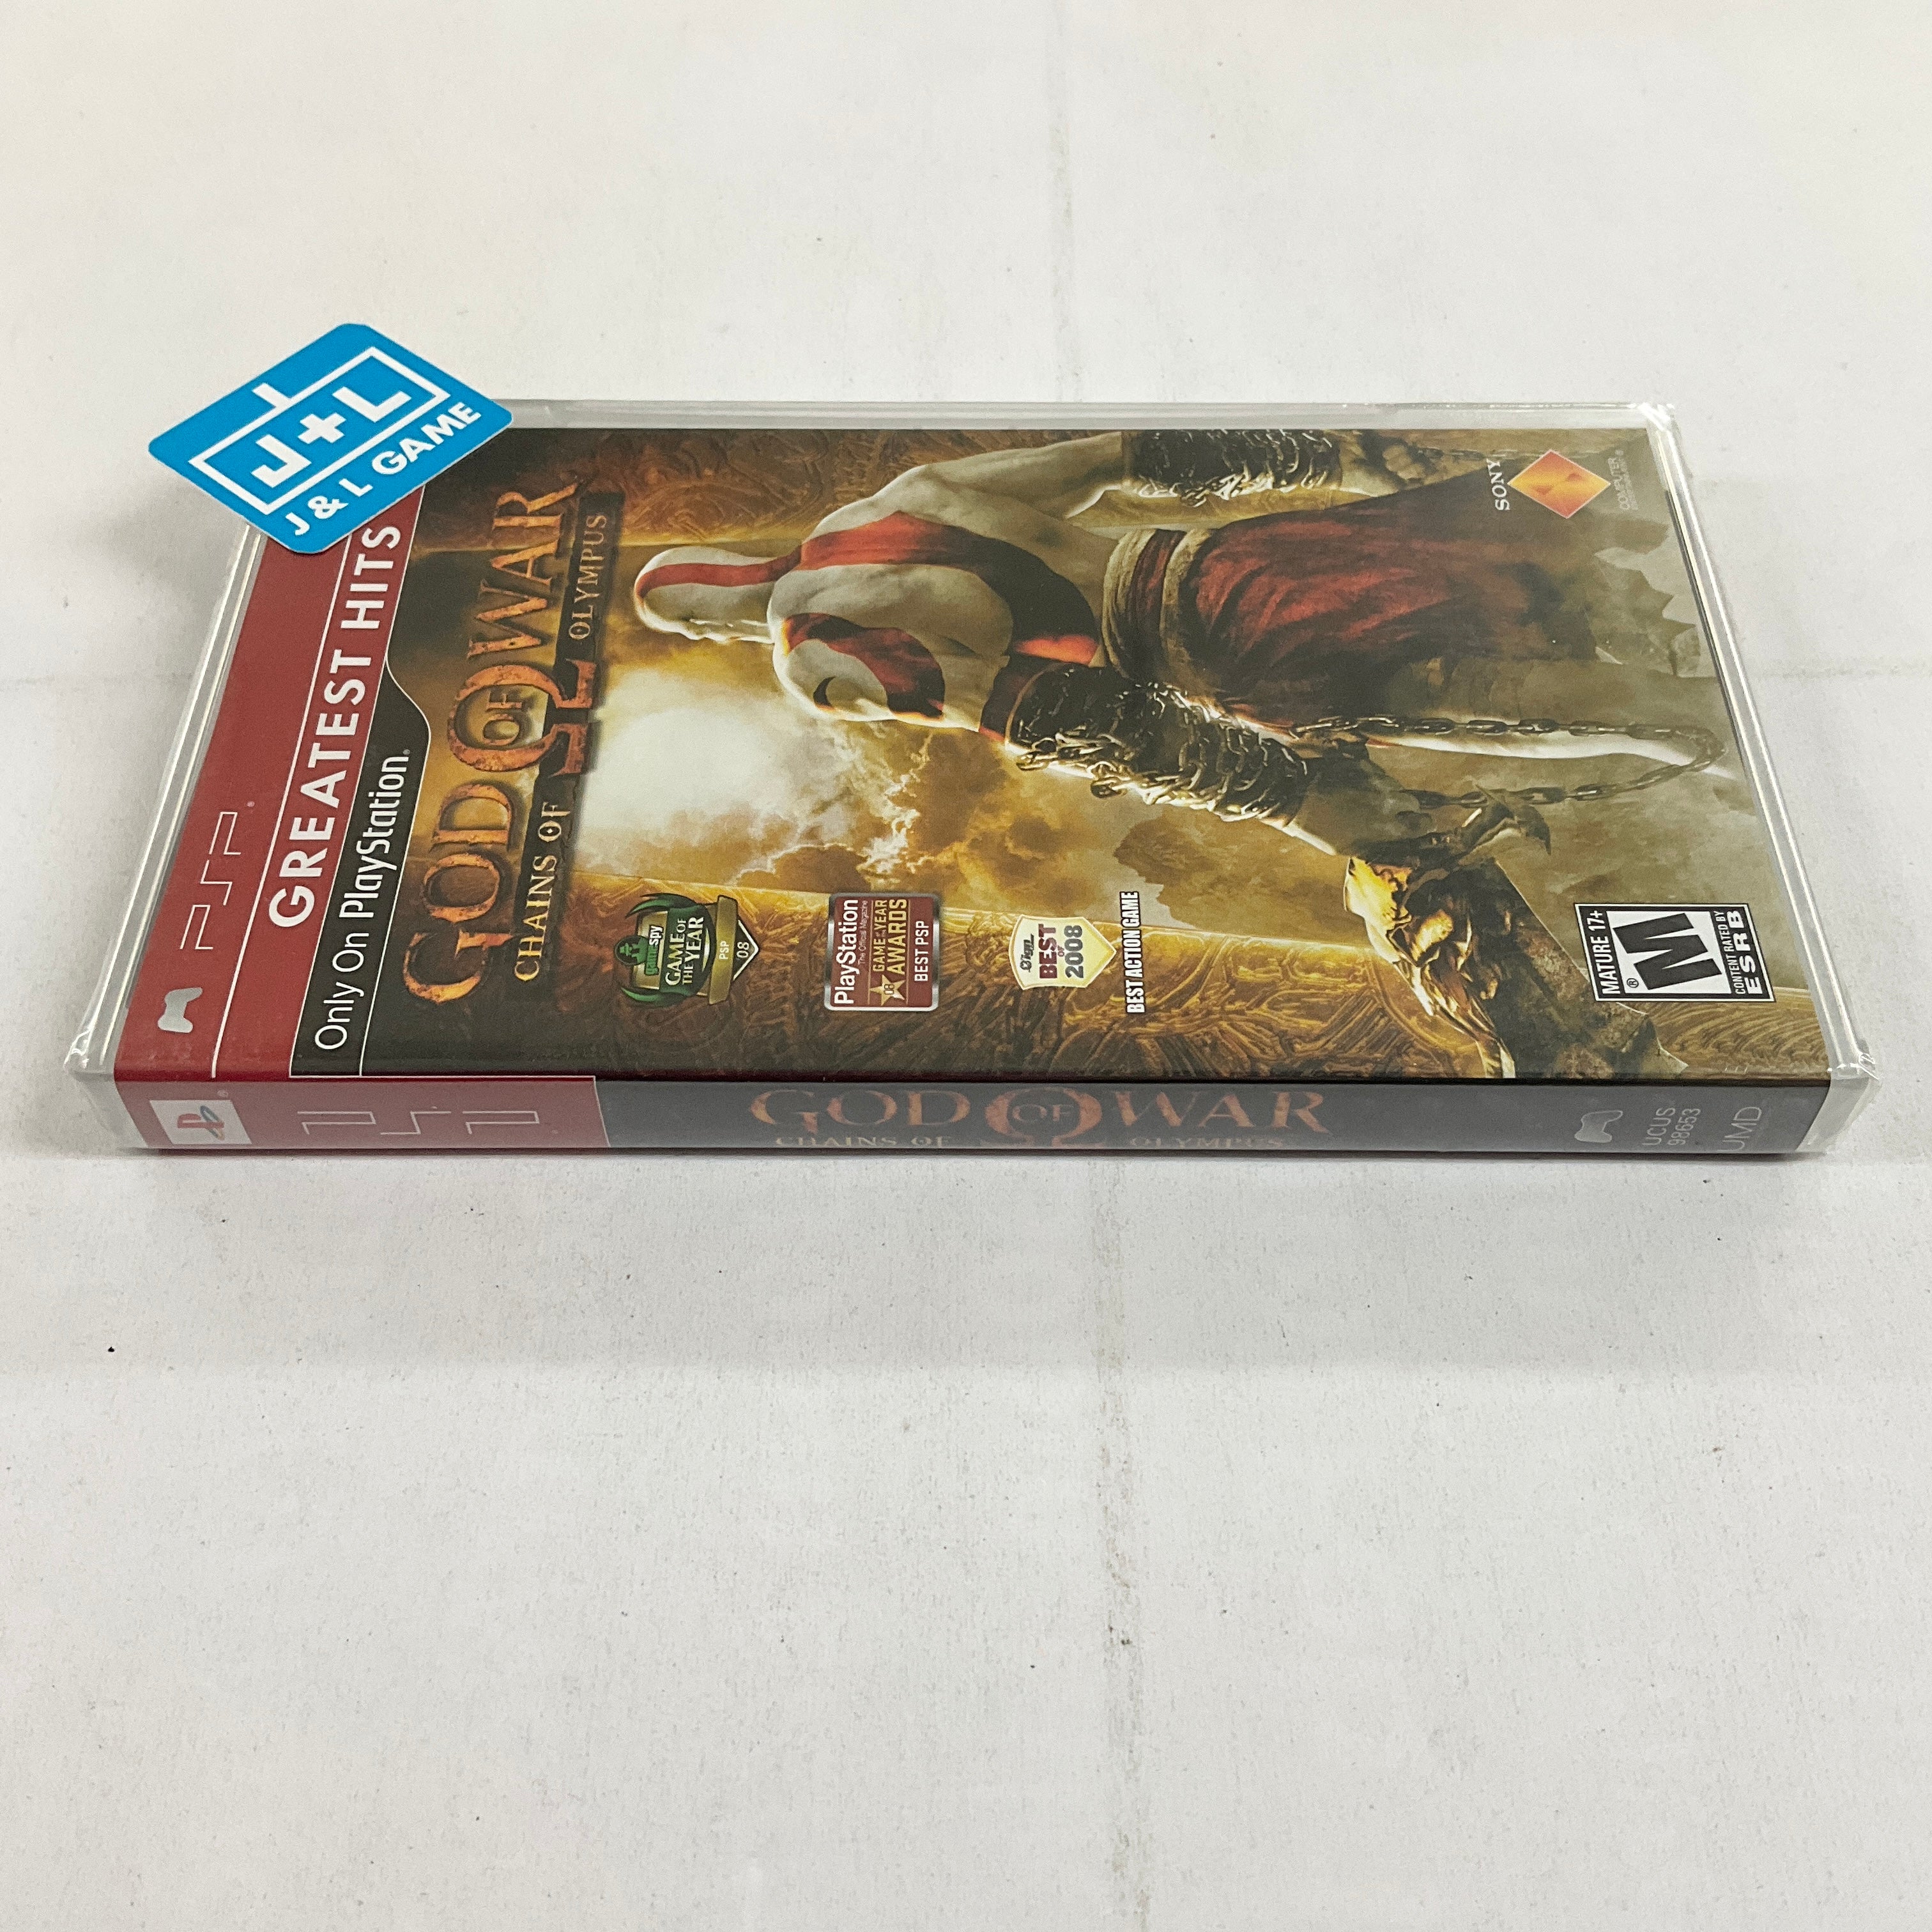 God of War: Chains of Olympus (Greatest Hits) - Sony PSP Video Games SCEA   